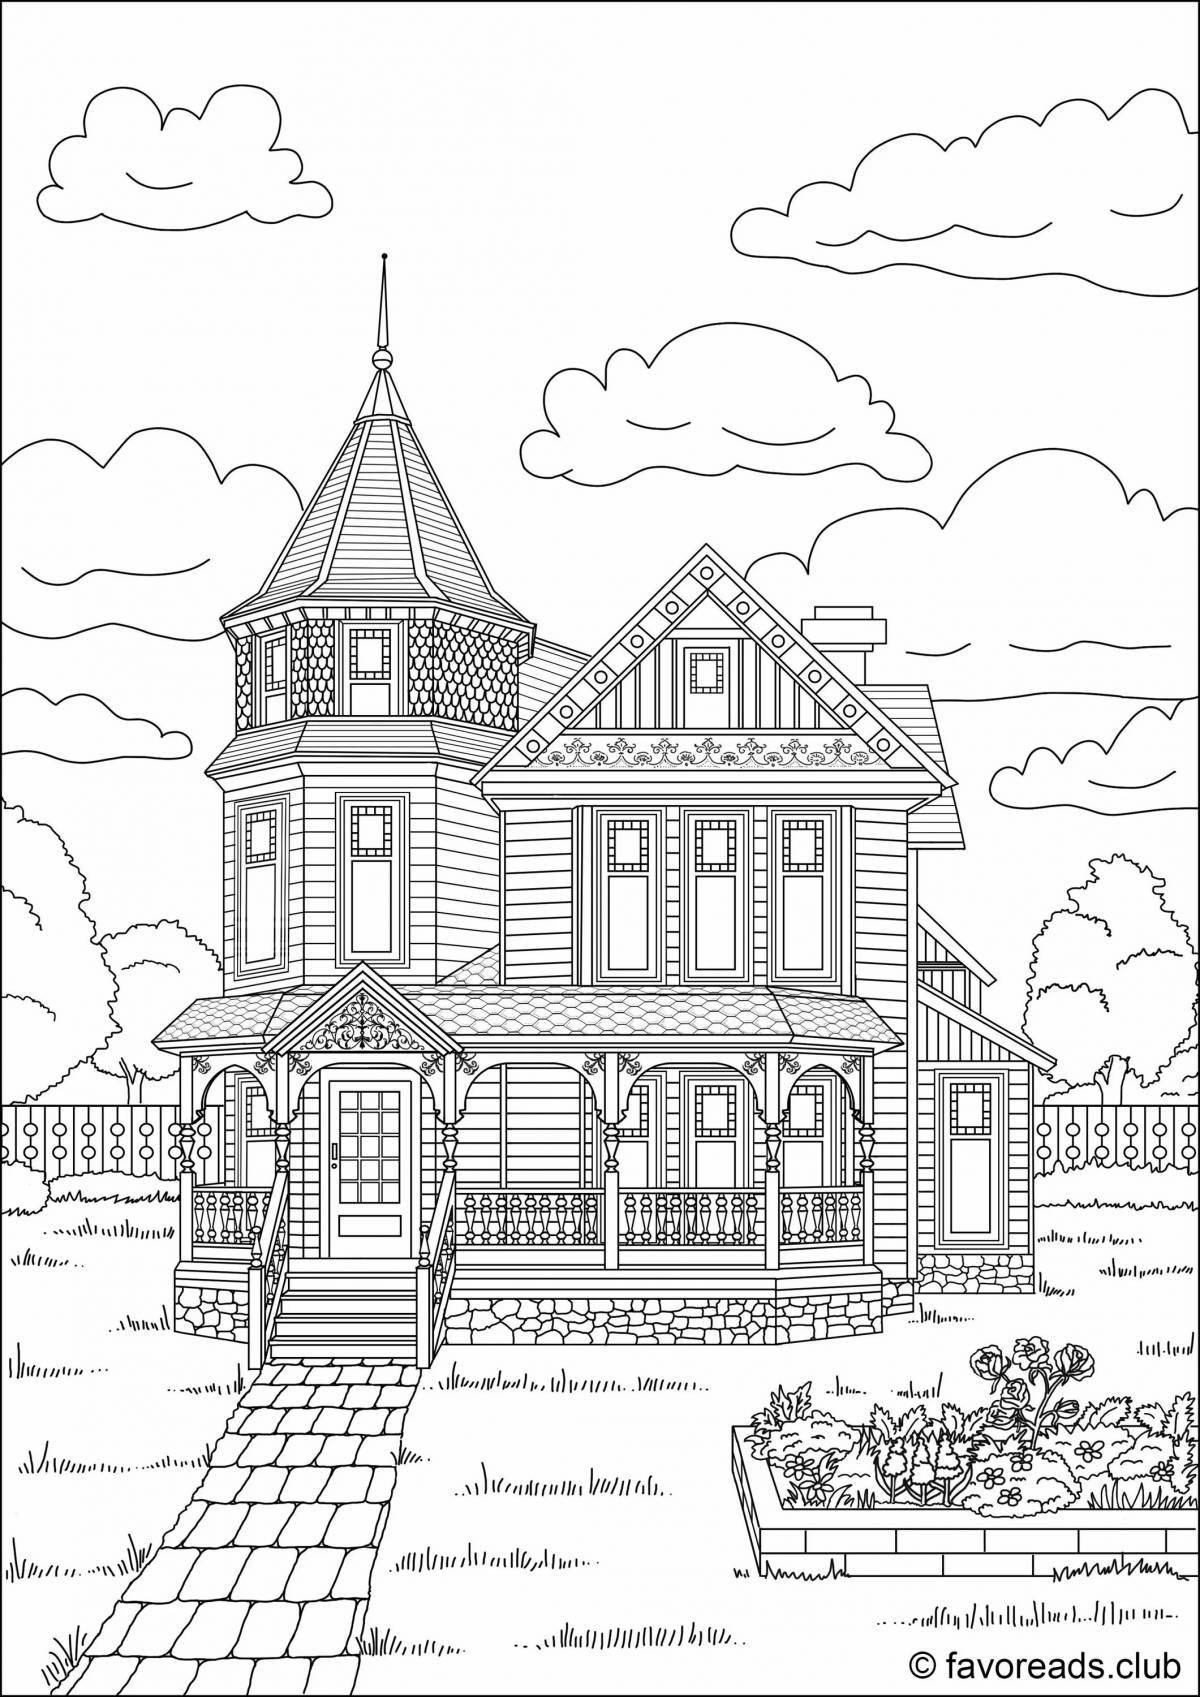 Awesome mansion coloring page